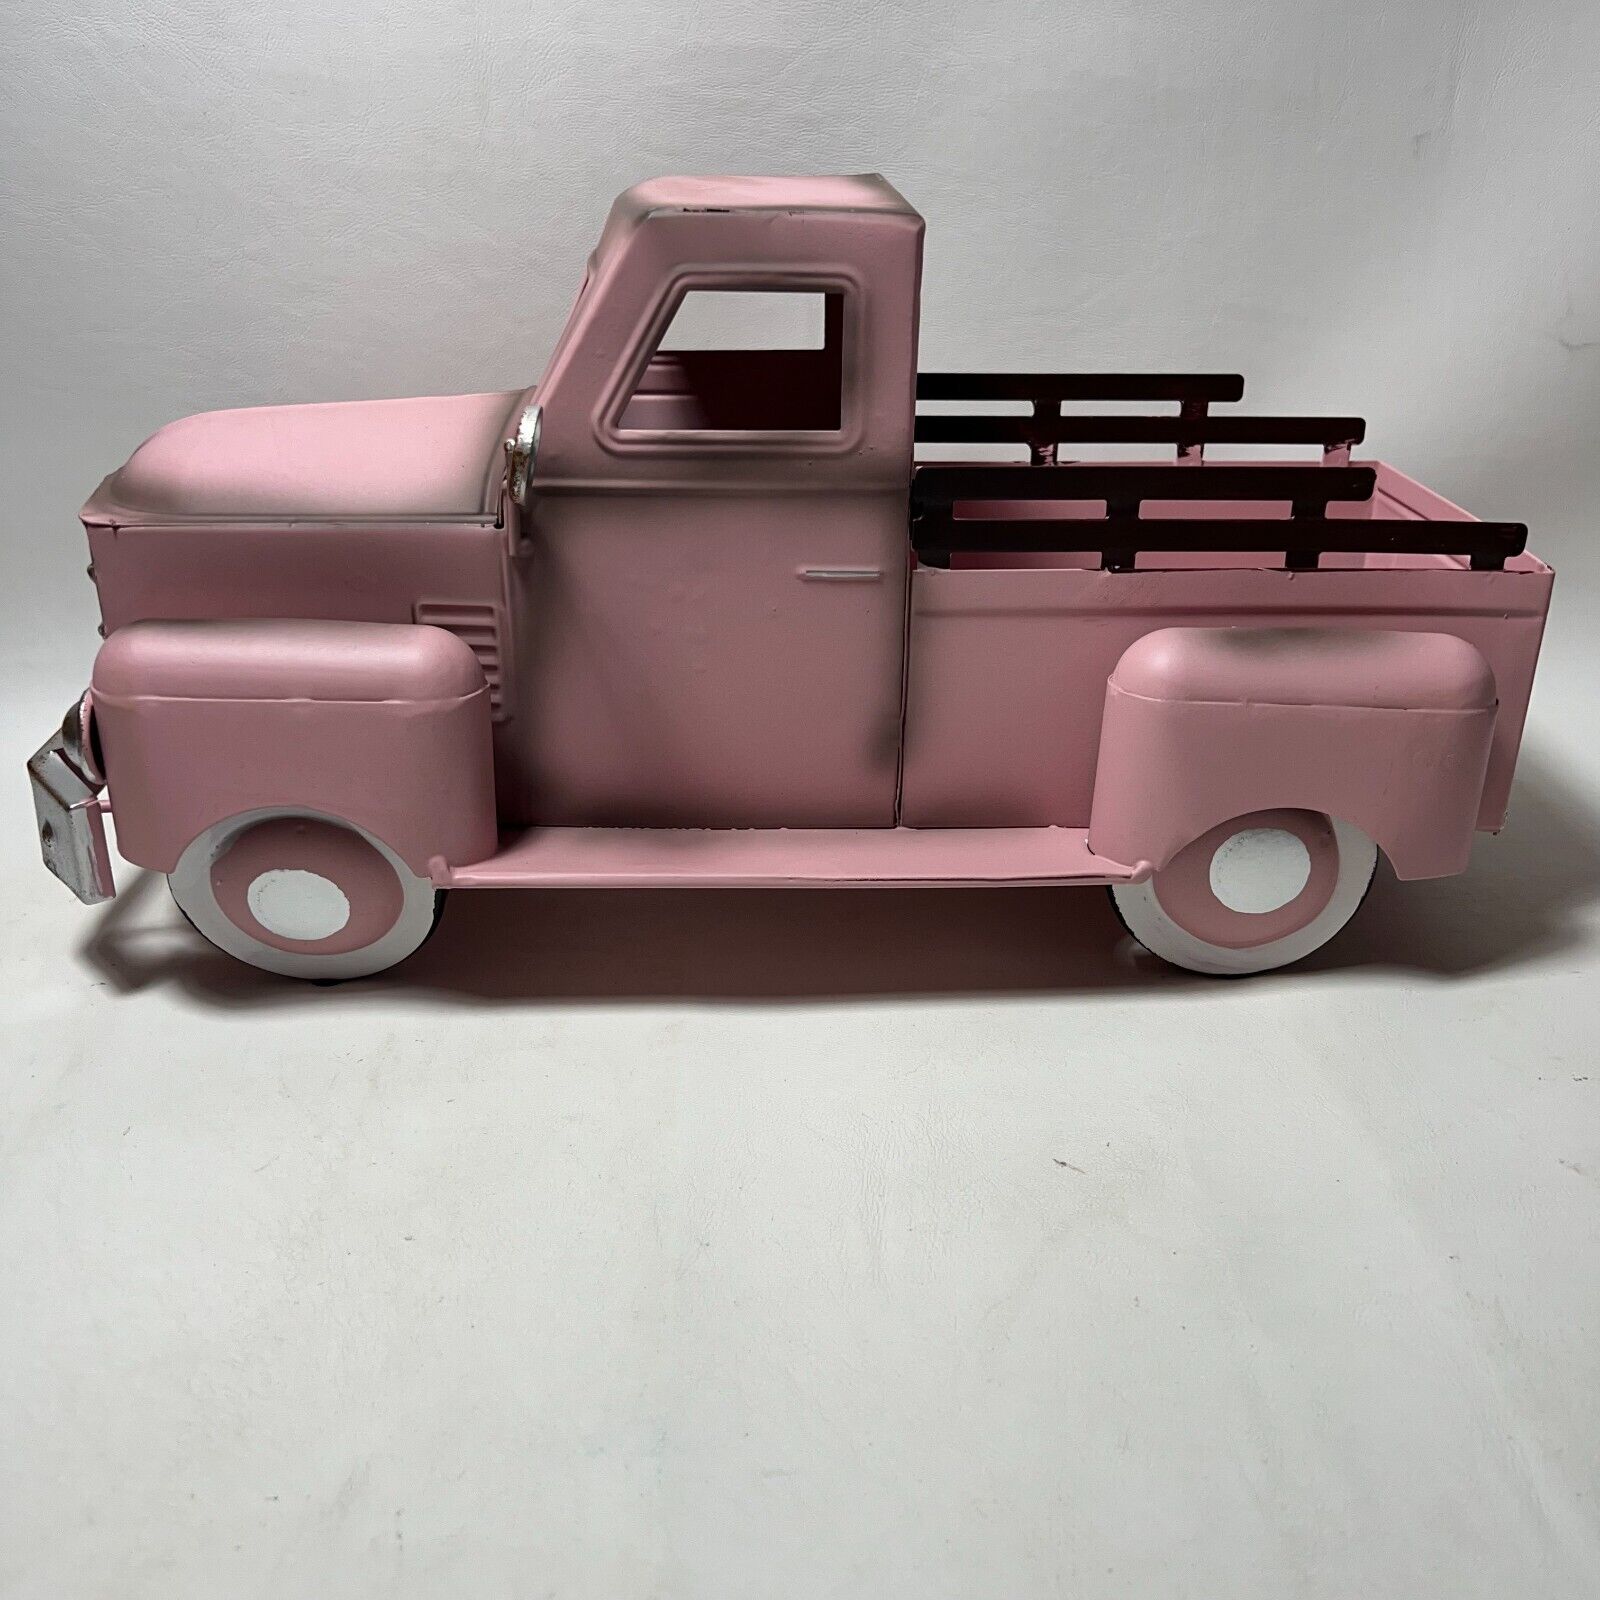 METAL PICKUP TRUCK Valerie Parr Hill PINK New in Box